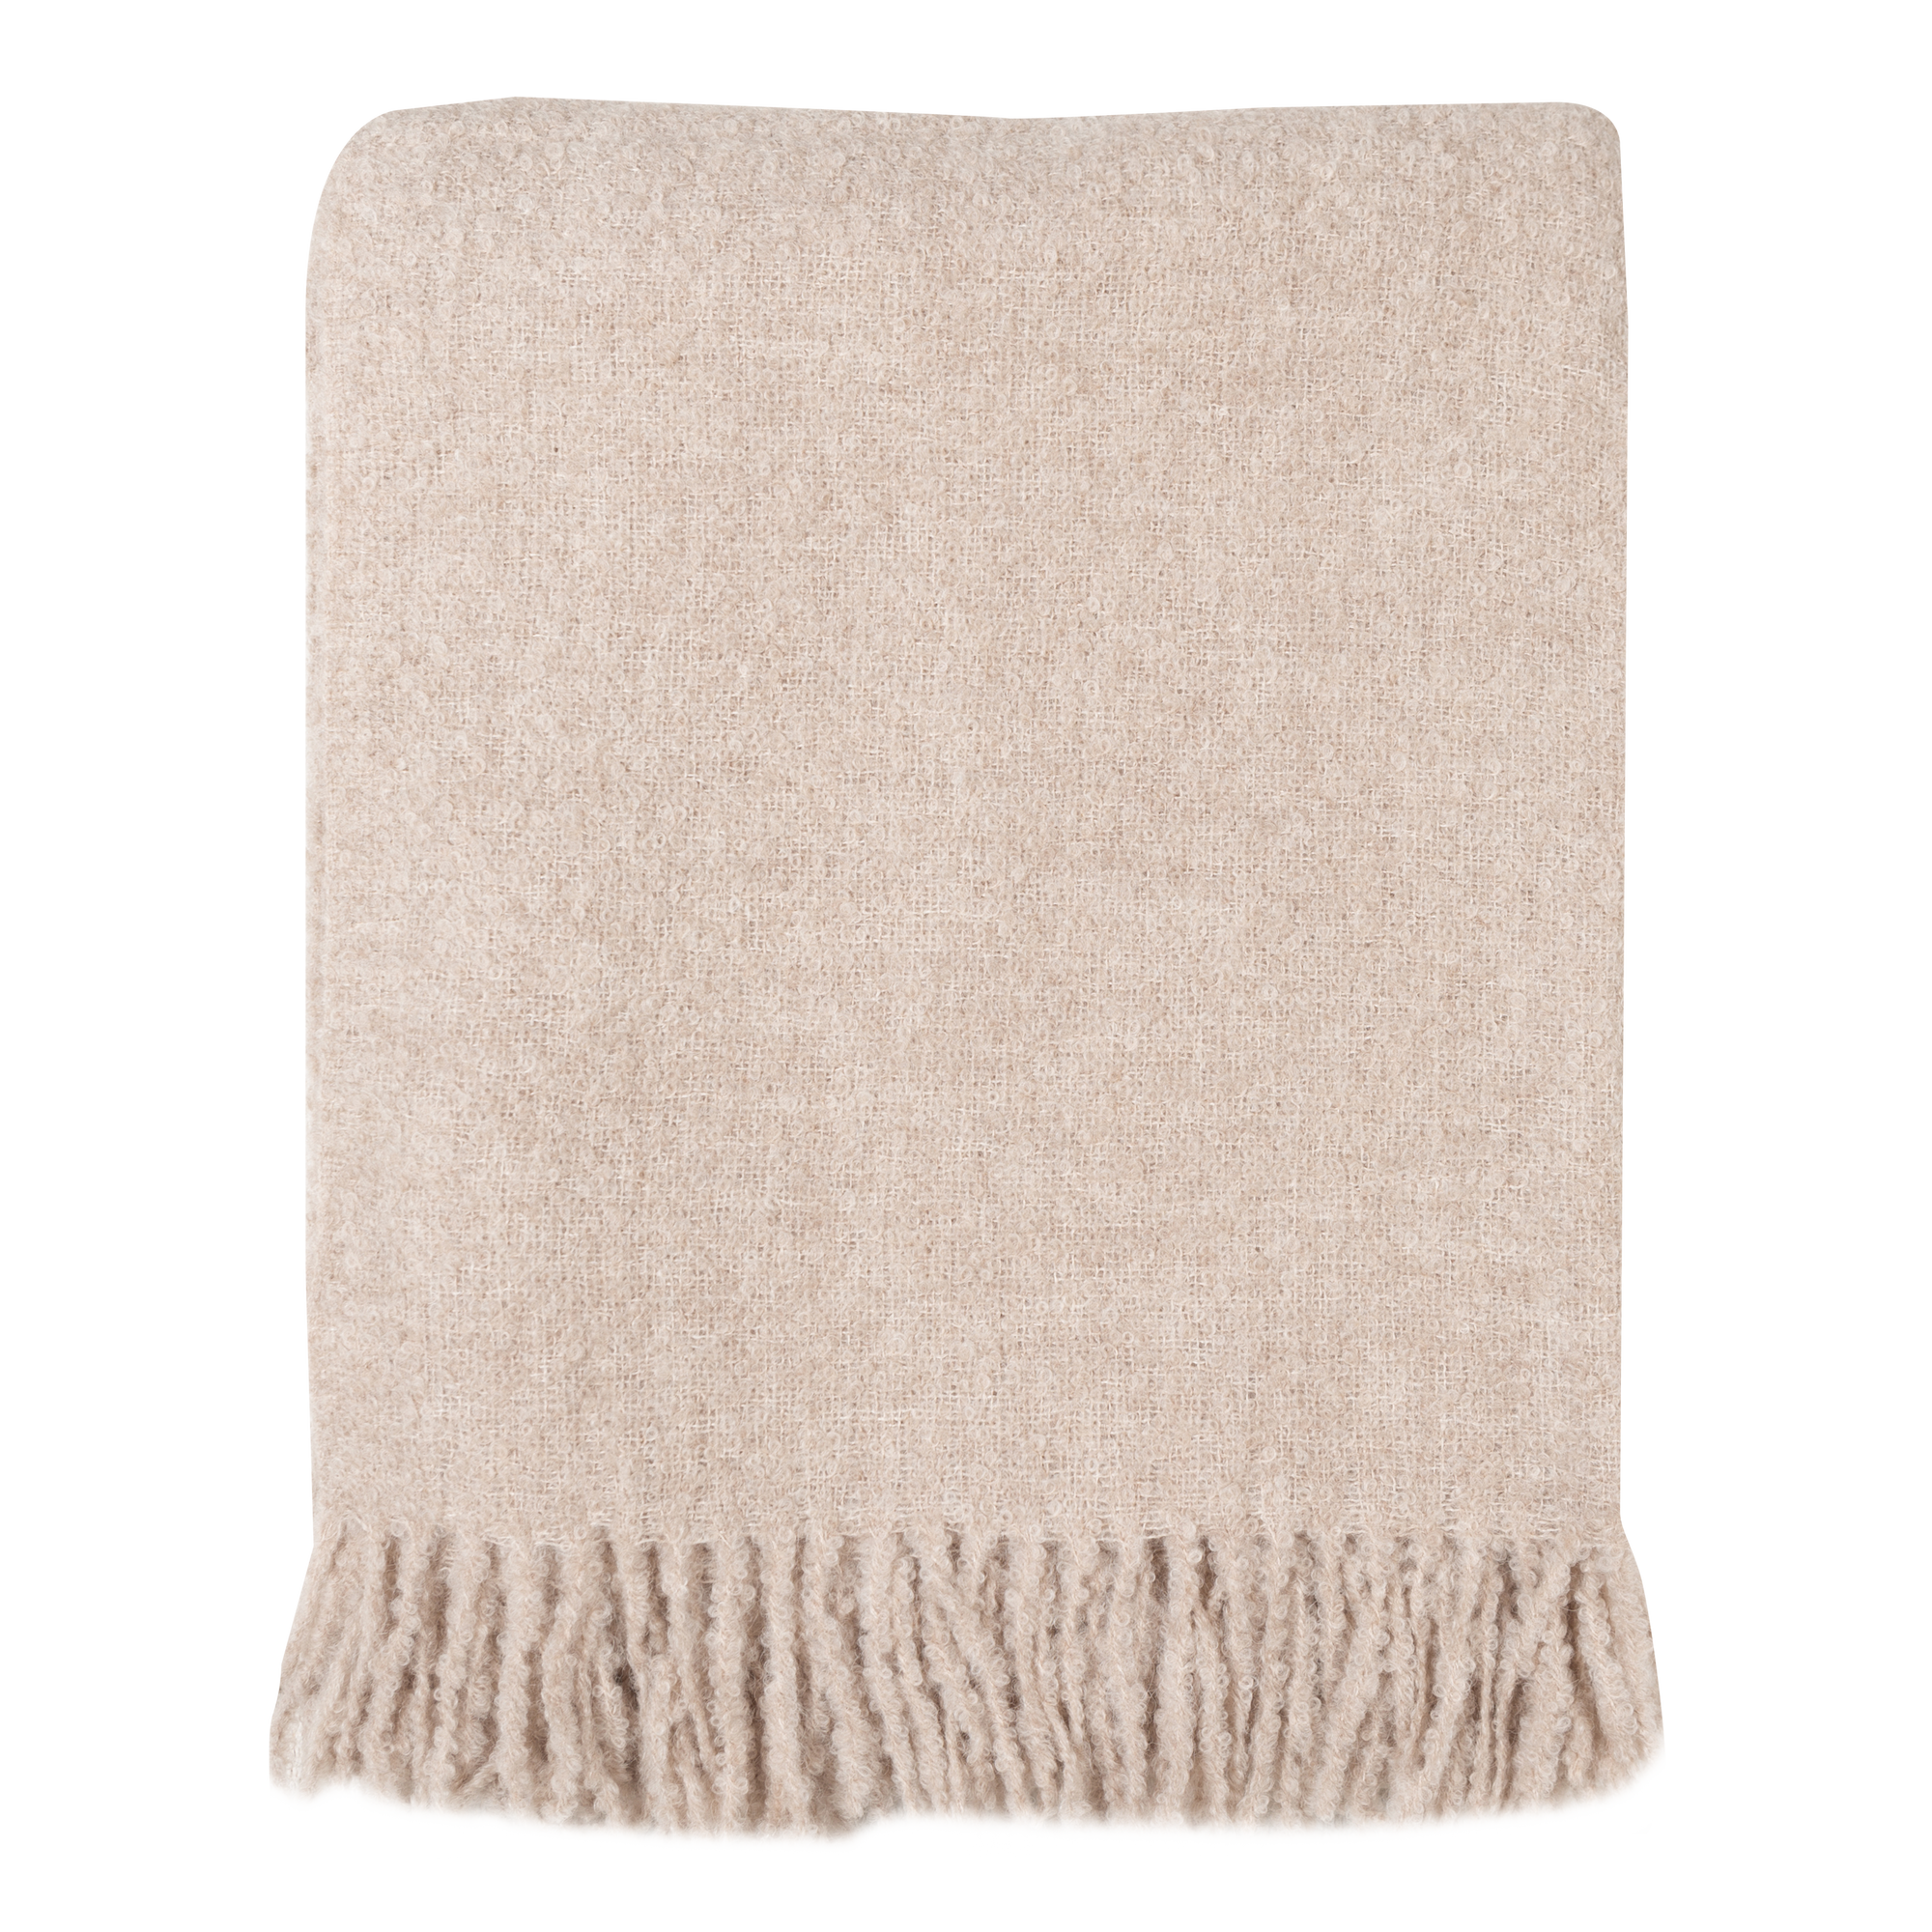 The Alpaca Boucle Throw features a soft and light mix of alpaca fleece and silk woven into a fine boucle.